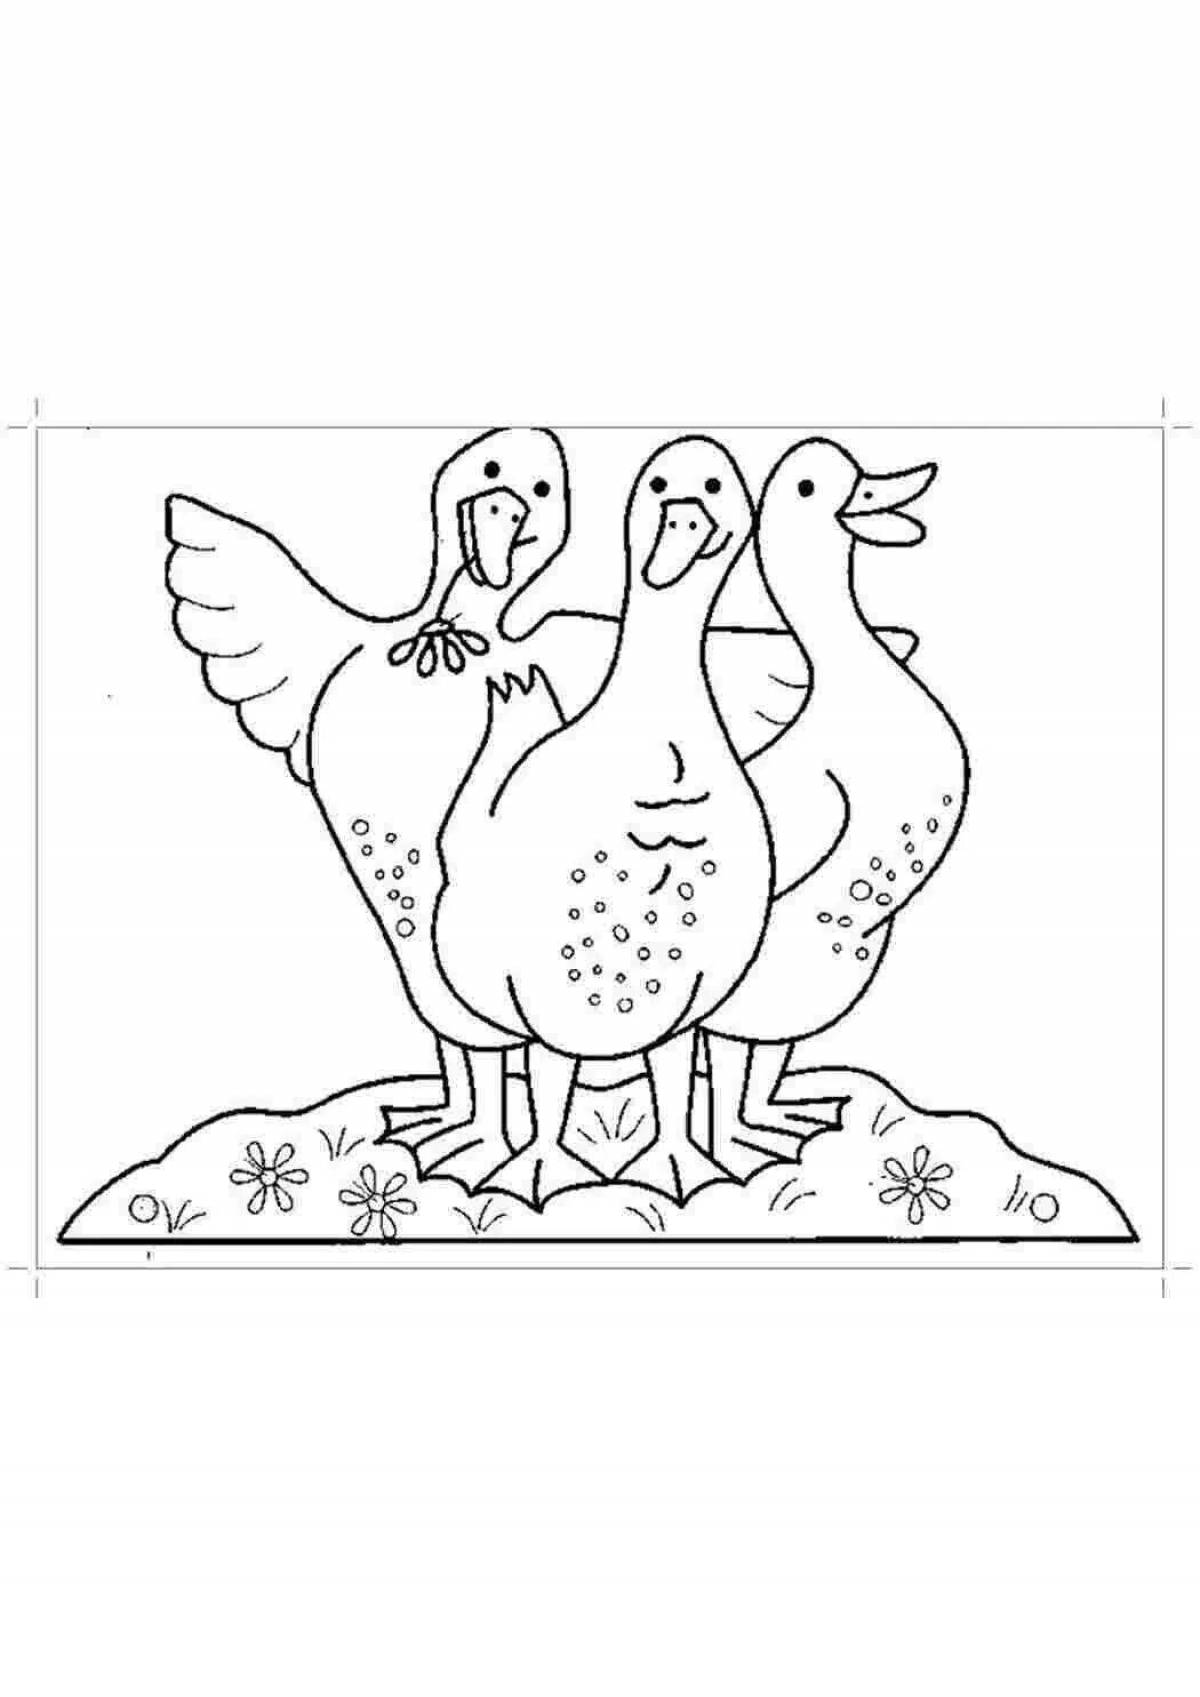 Fun bird coloring book for 6-7 year olds